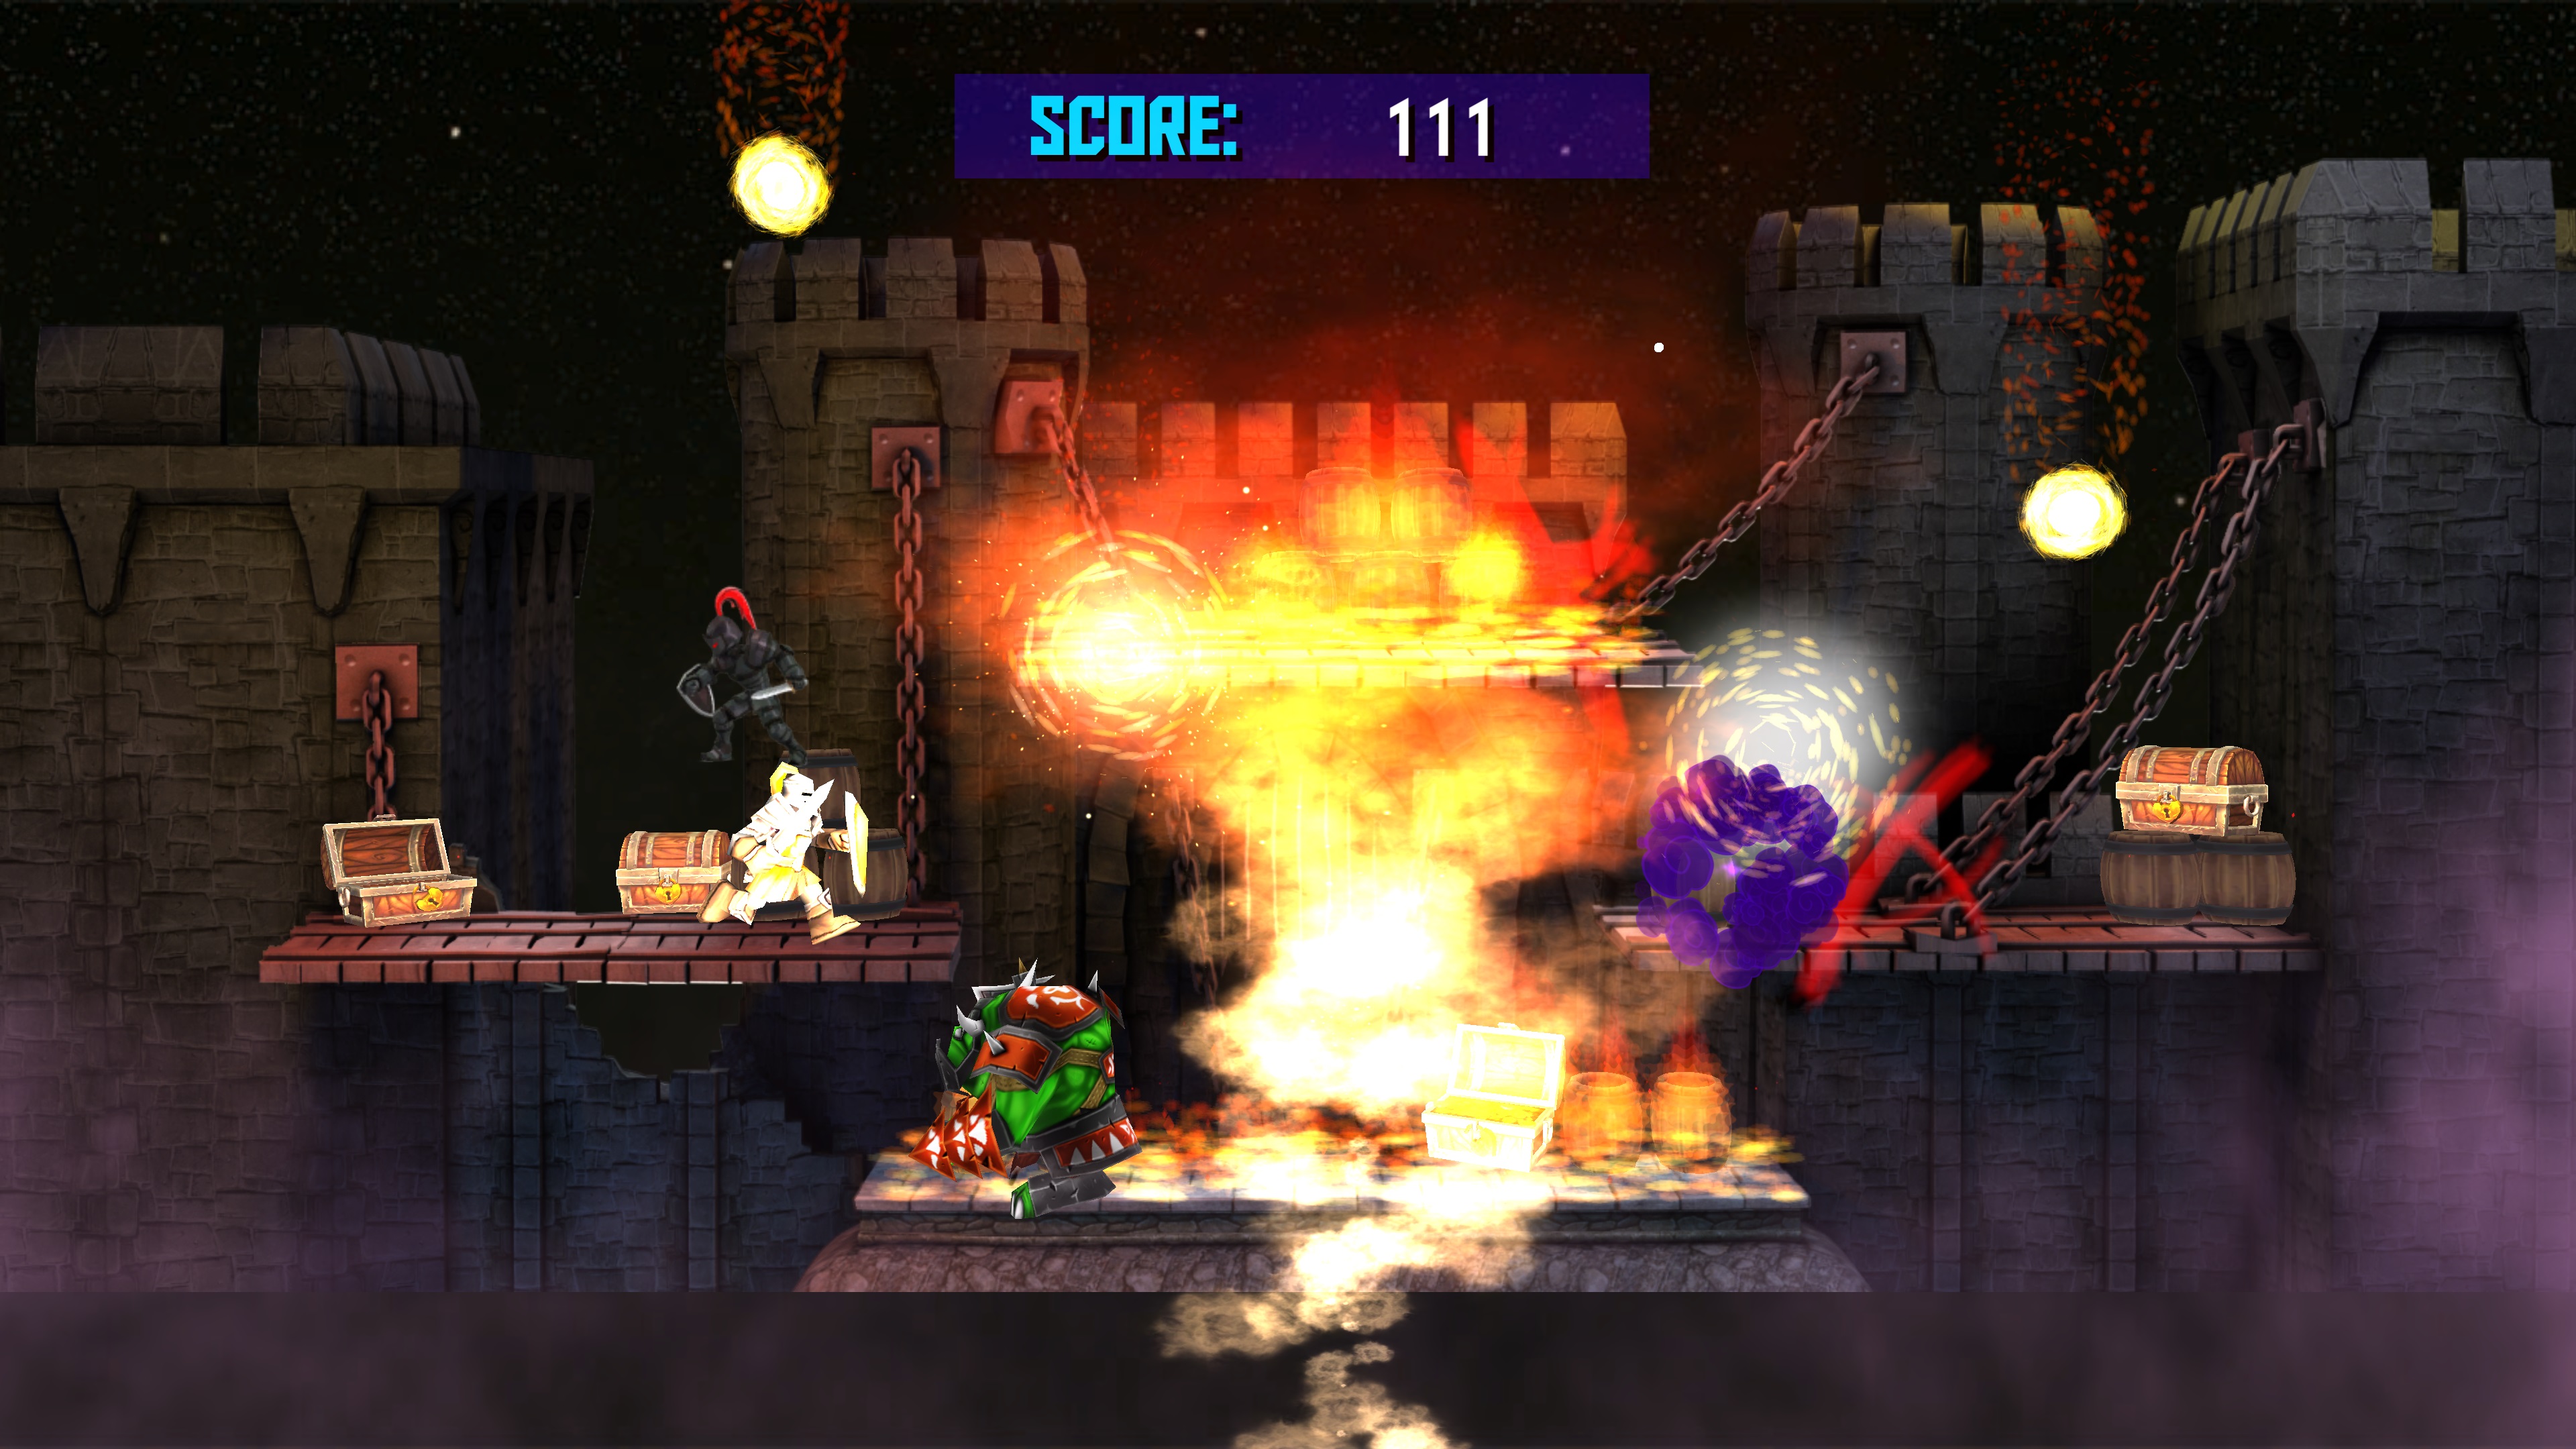 Escape From The Dragons screenshot